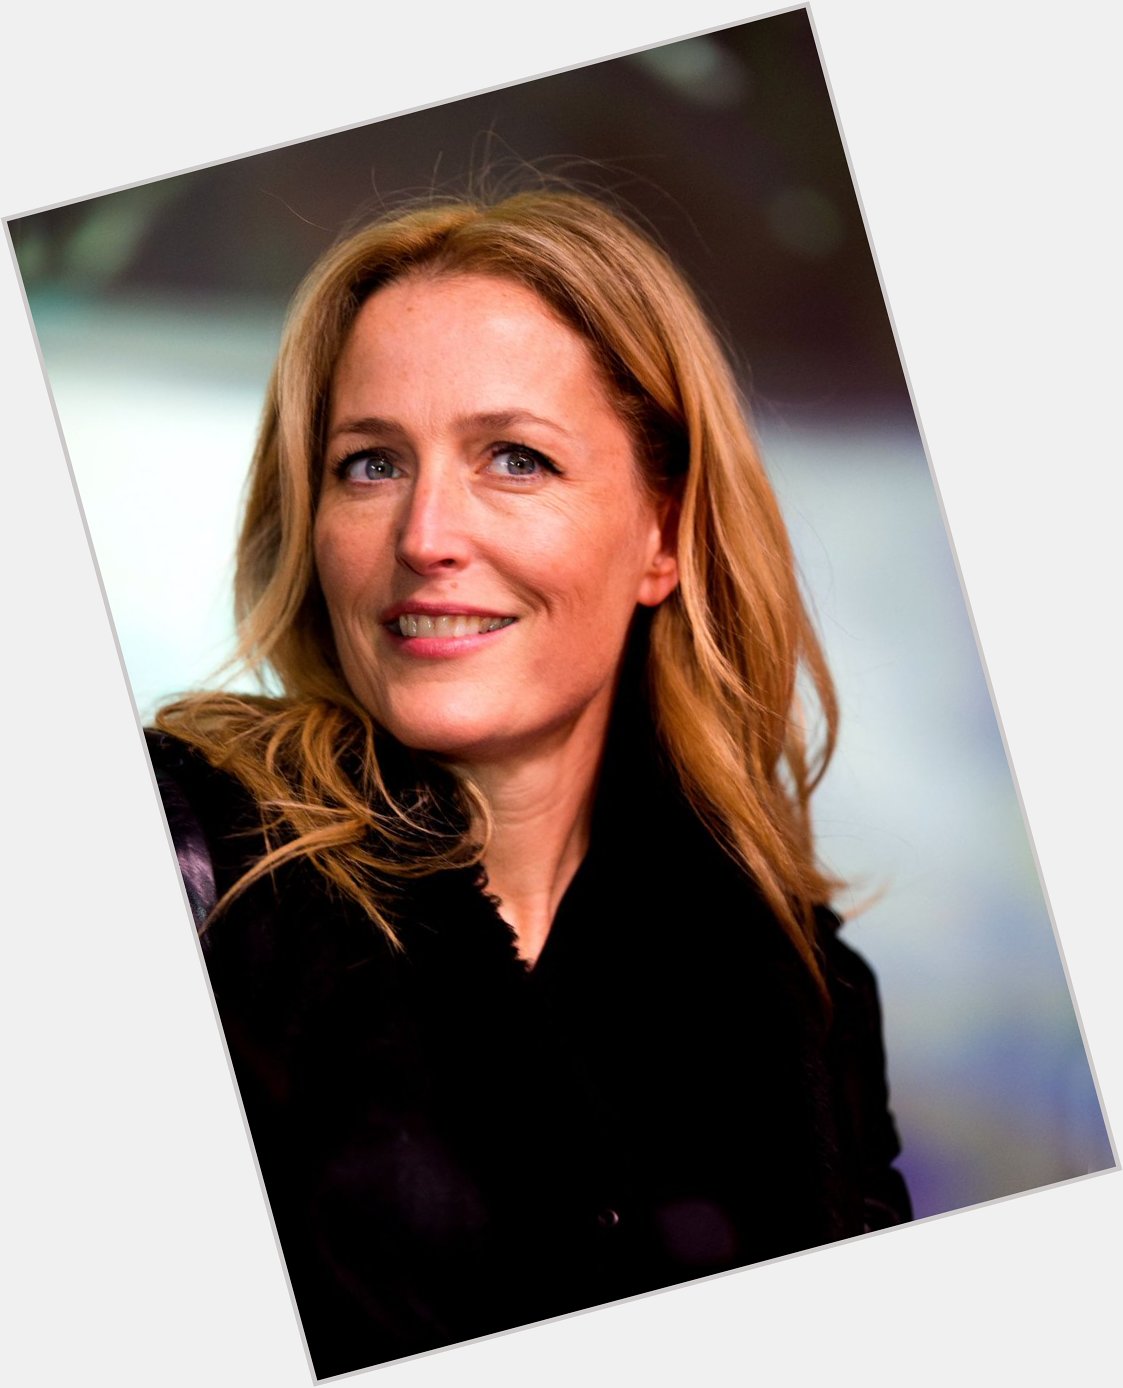 Entertainment
·
LIVE
Fans wish Gillian Anderson a happy birthday Party popper 